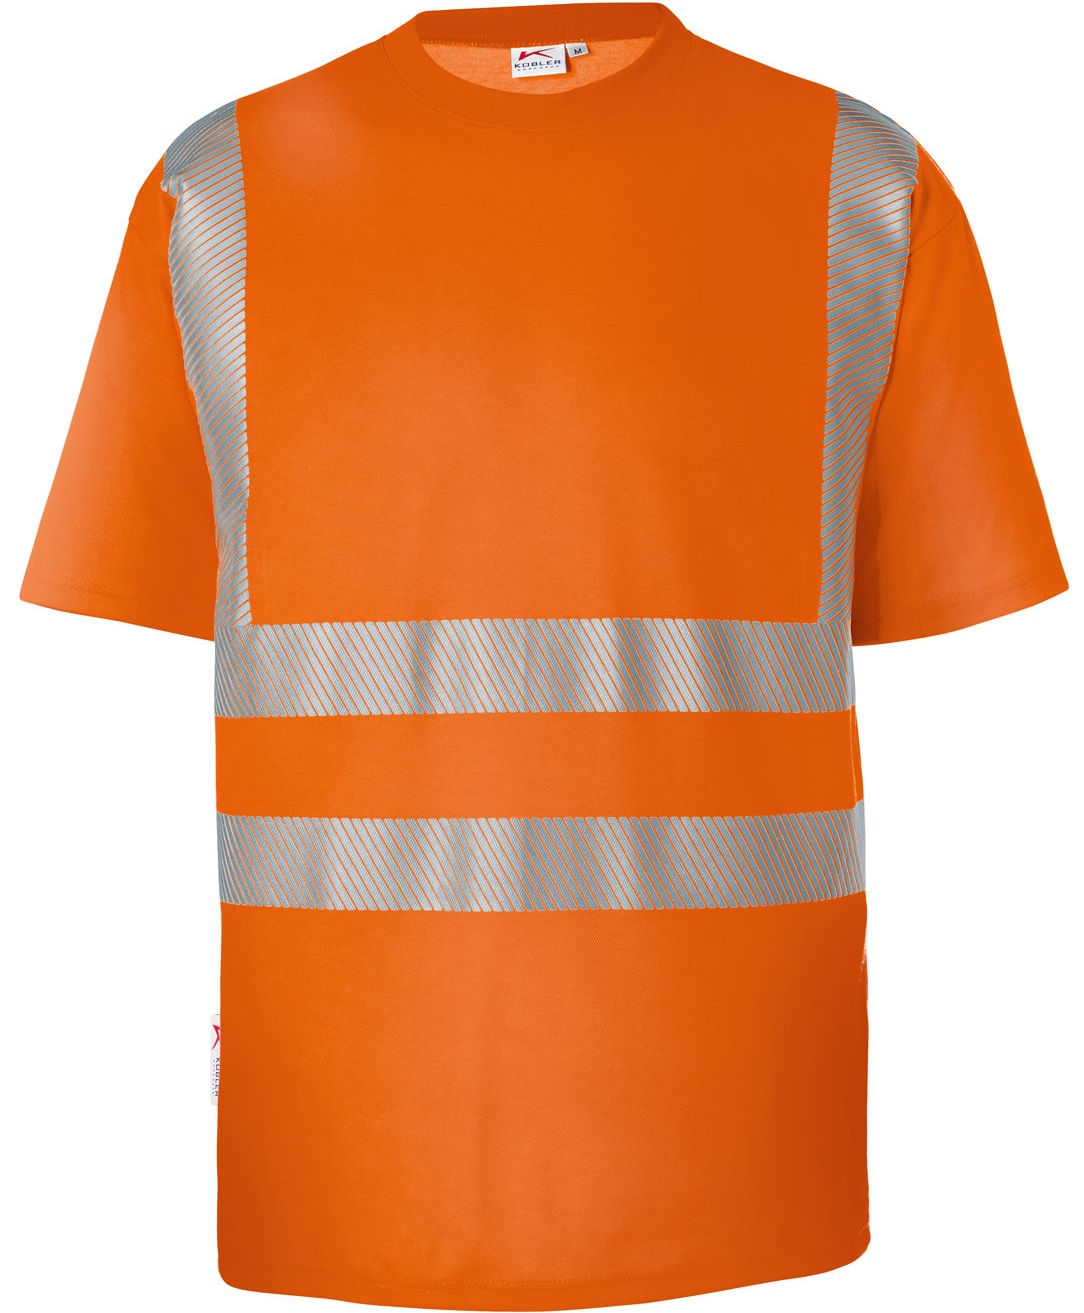 Kübler REFLECTIQ T-shirt PSA 2 5043 8227 | Hi Vis T-shirts & polo shirts |  Warning protection | By profession | Clever-AS-Technik - Industrial safety